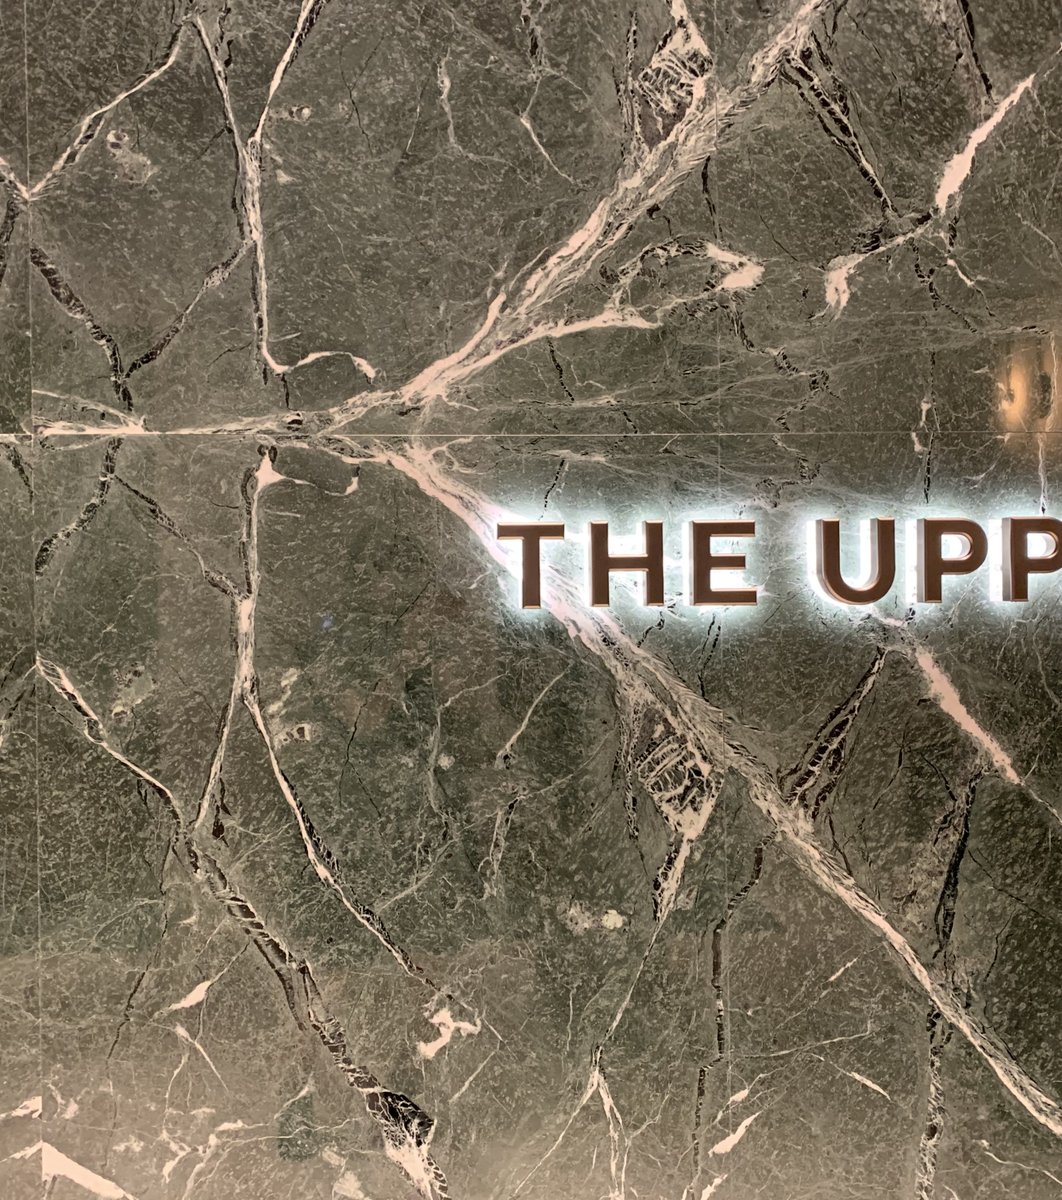  THE UPPER